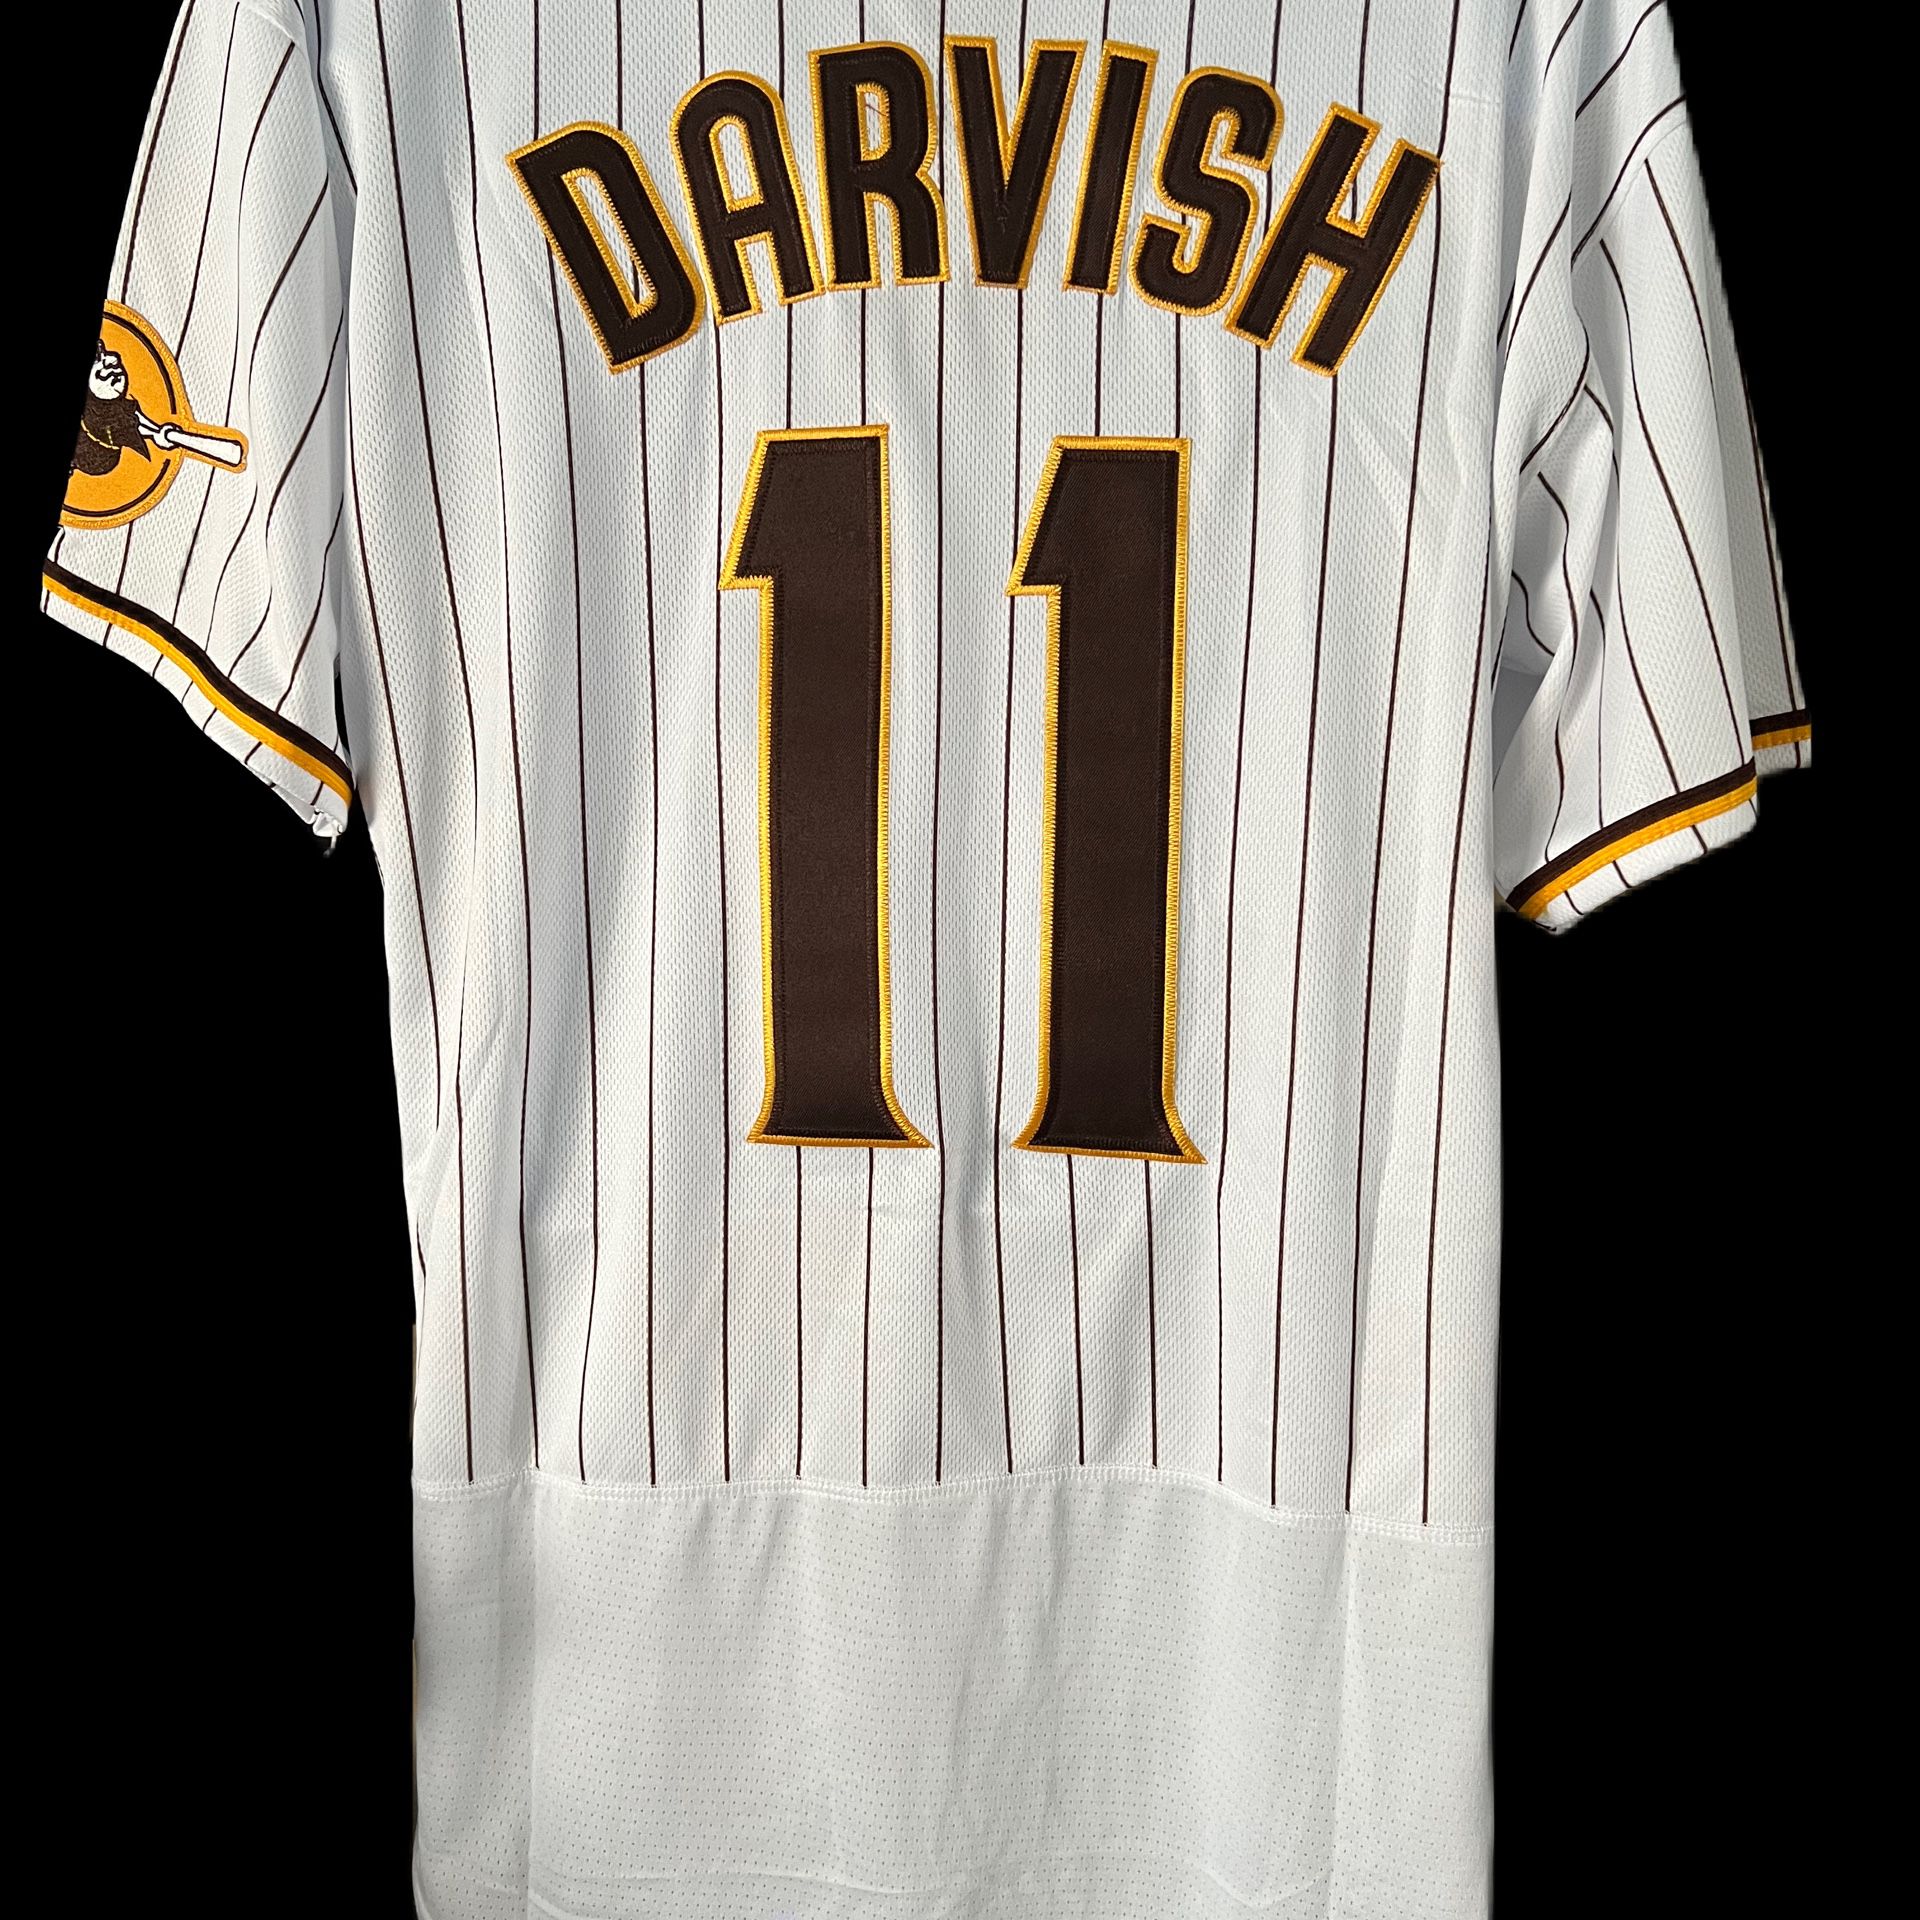 New ダルビッシュ有 (Yu Darvish) jerseys are now available at the #Padres Team  Store! 🇯🇵